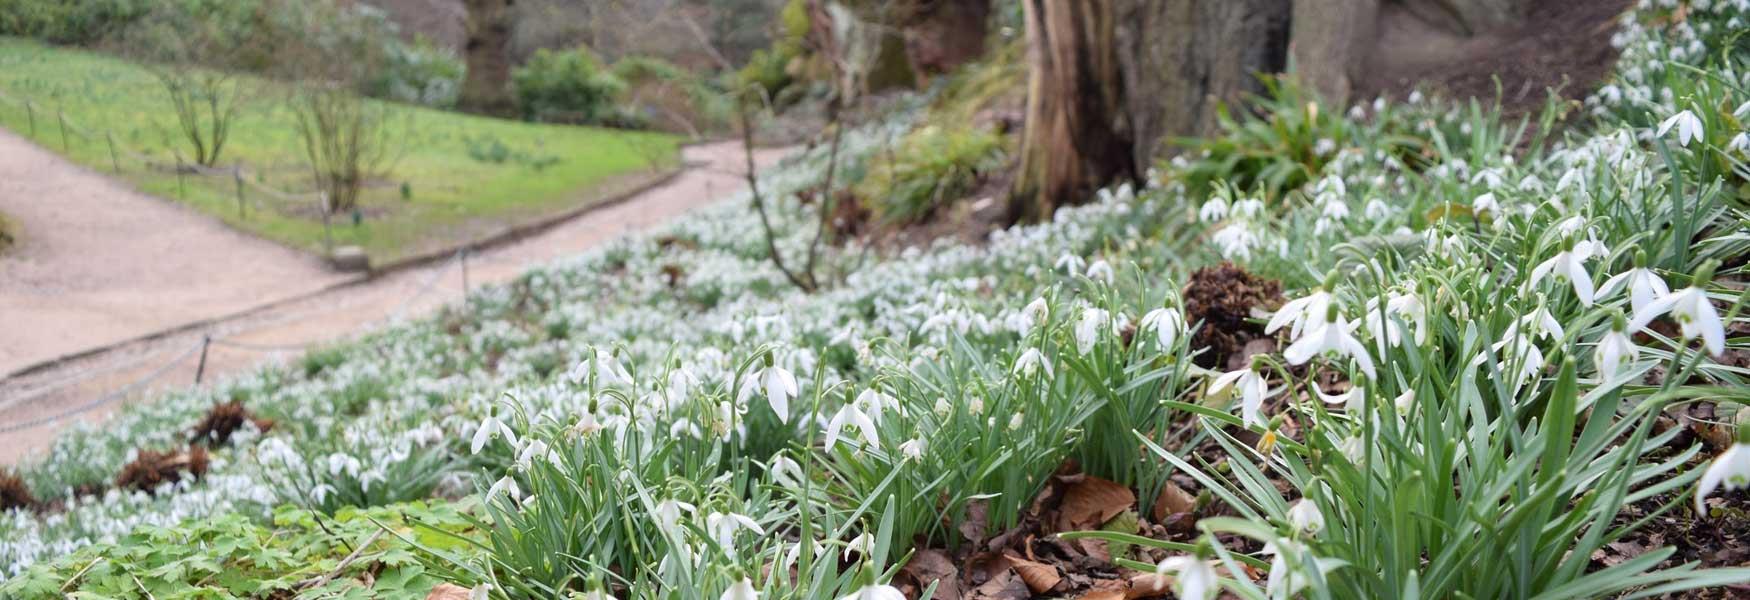 Snowdrops at National Trust Quarry Bank. Credit National Trust